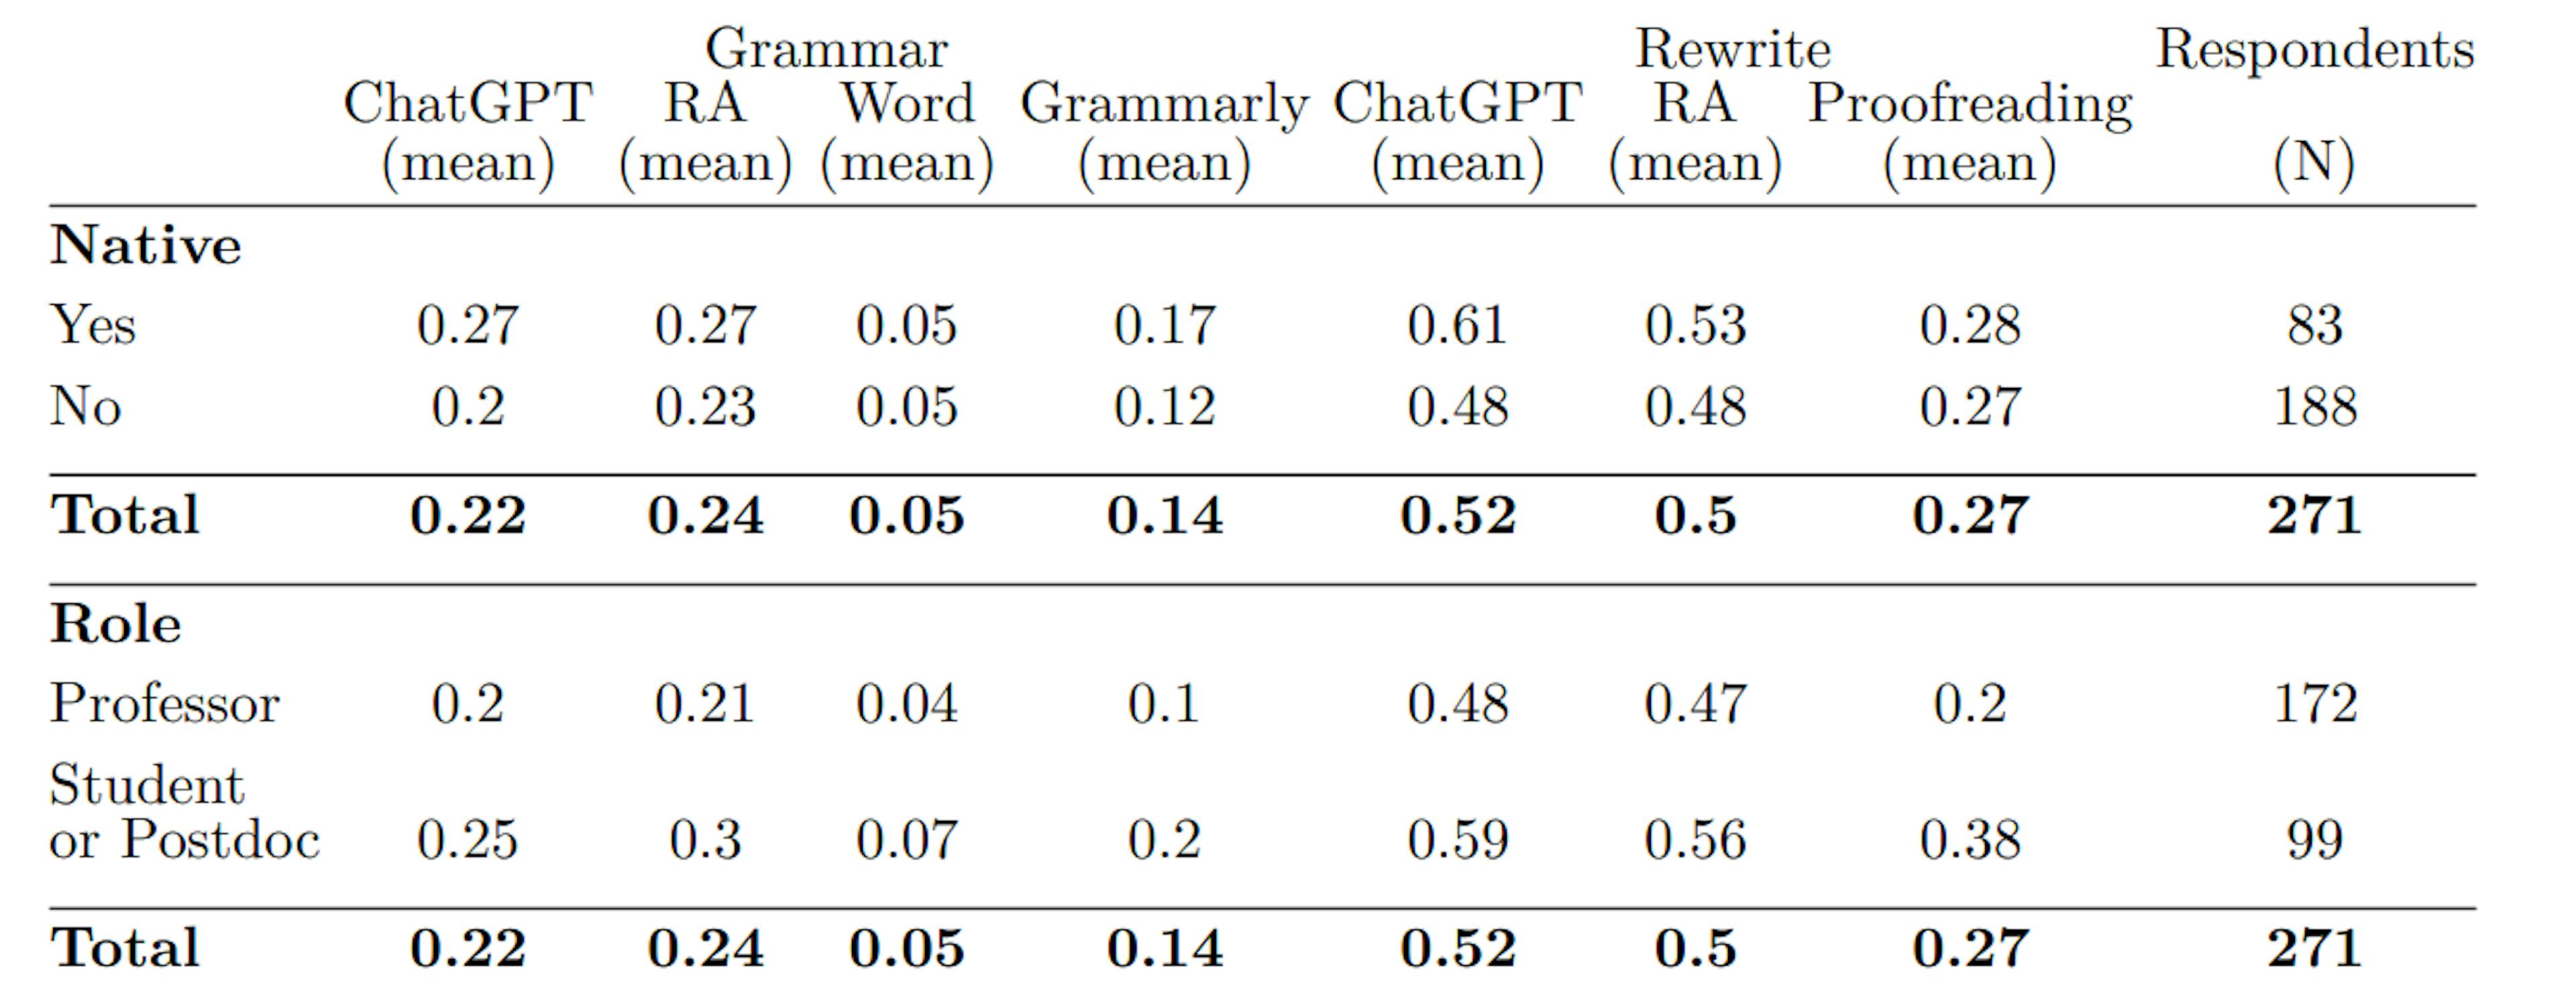 Table 3: The survey averages responses to whether authors should acknowledge using ChatGPT, RA, Grammarly, and Word for grammar correction, as well as ChatGPT, RA, and proofreading for text rewriting based on the respondent’s role and whether the respondent is a native English speaker.